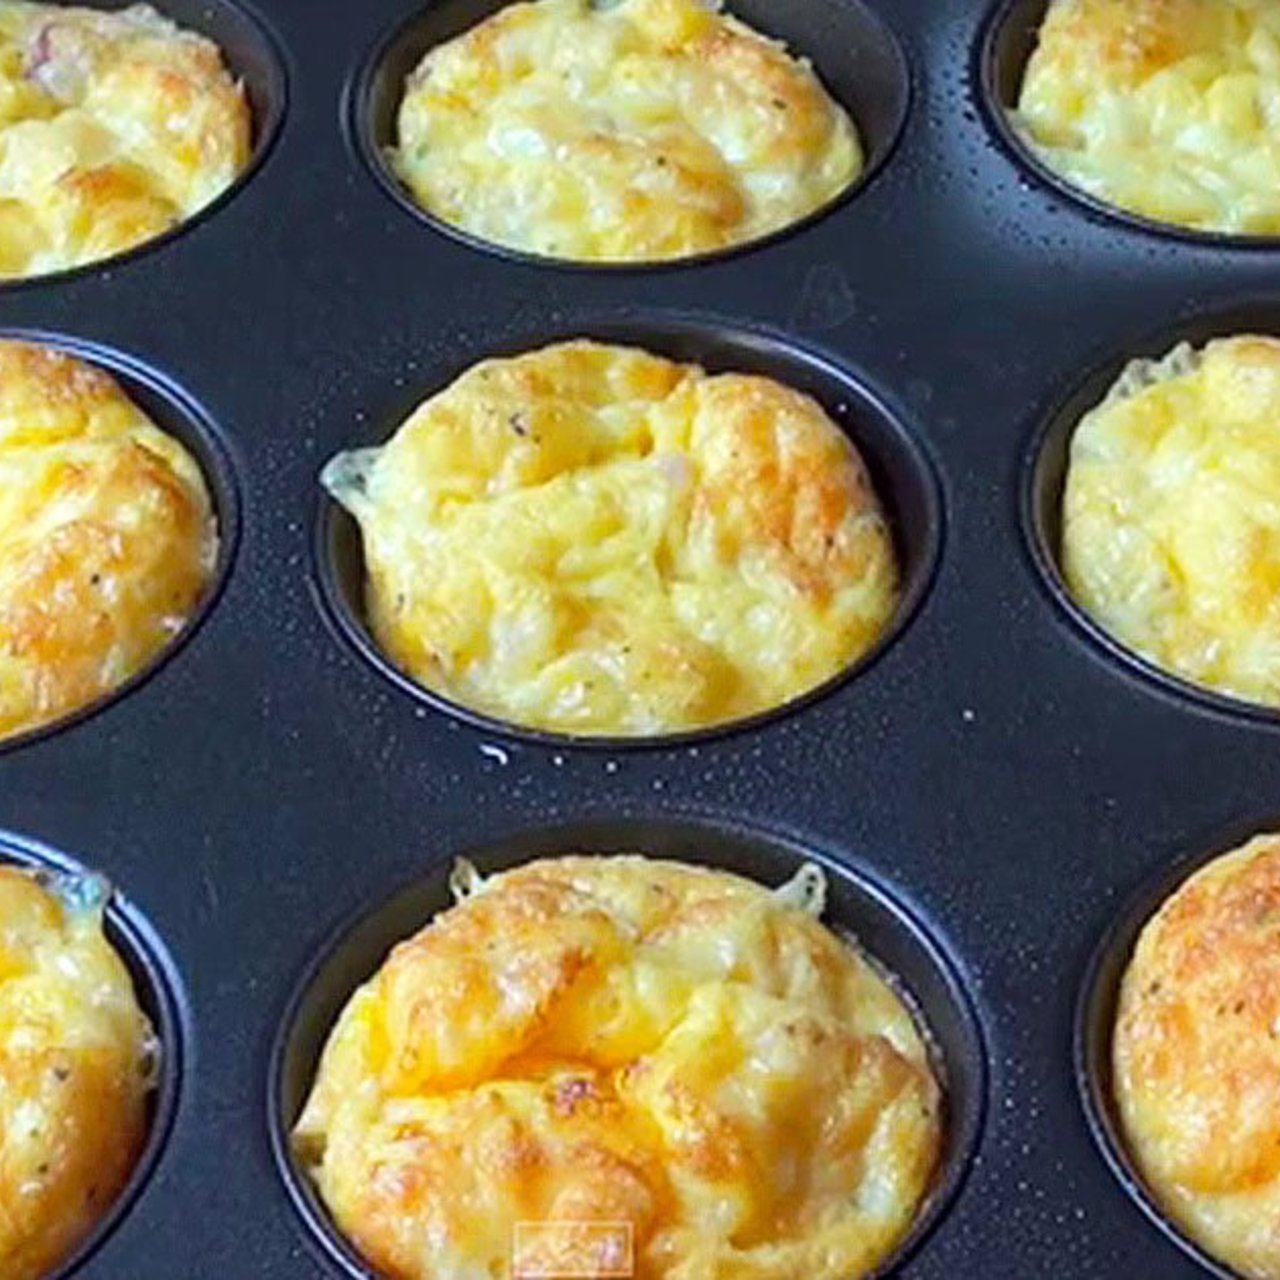 BAKED EGG IN MUFFIN TIN